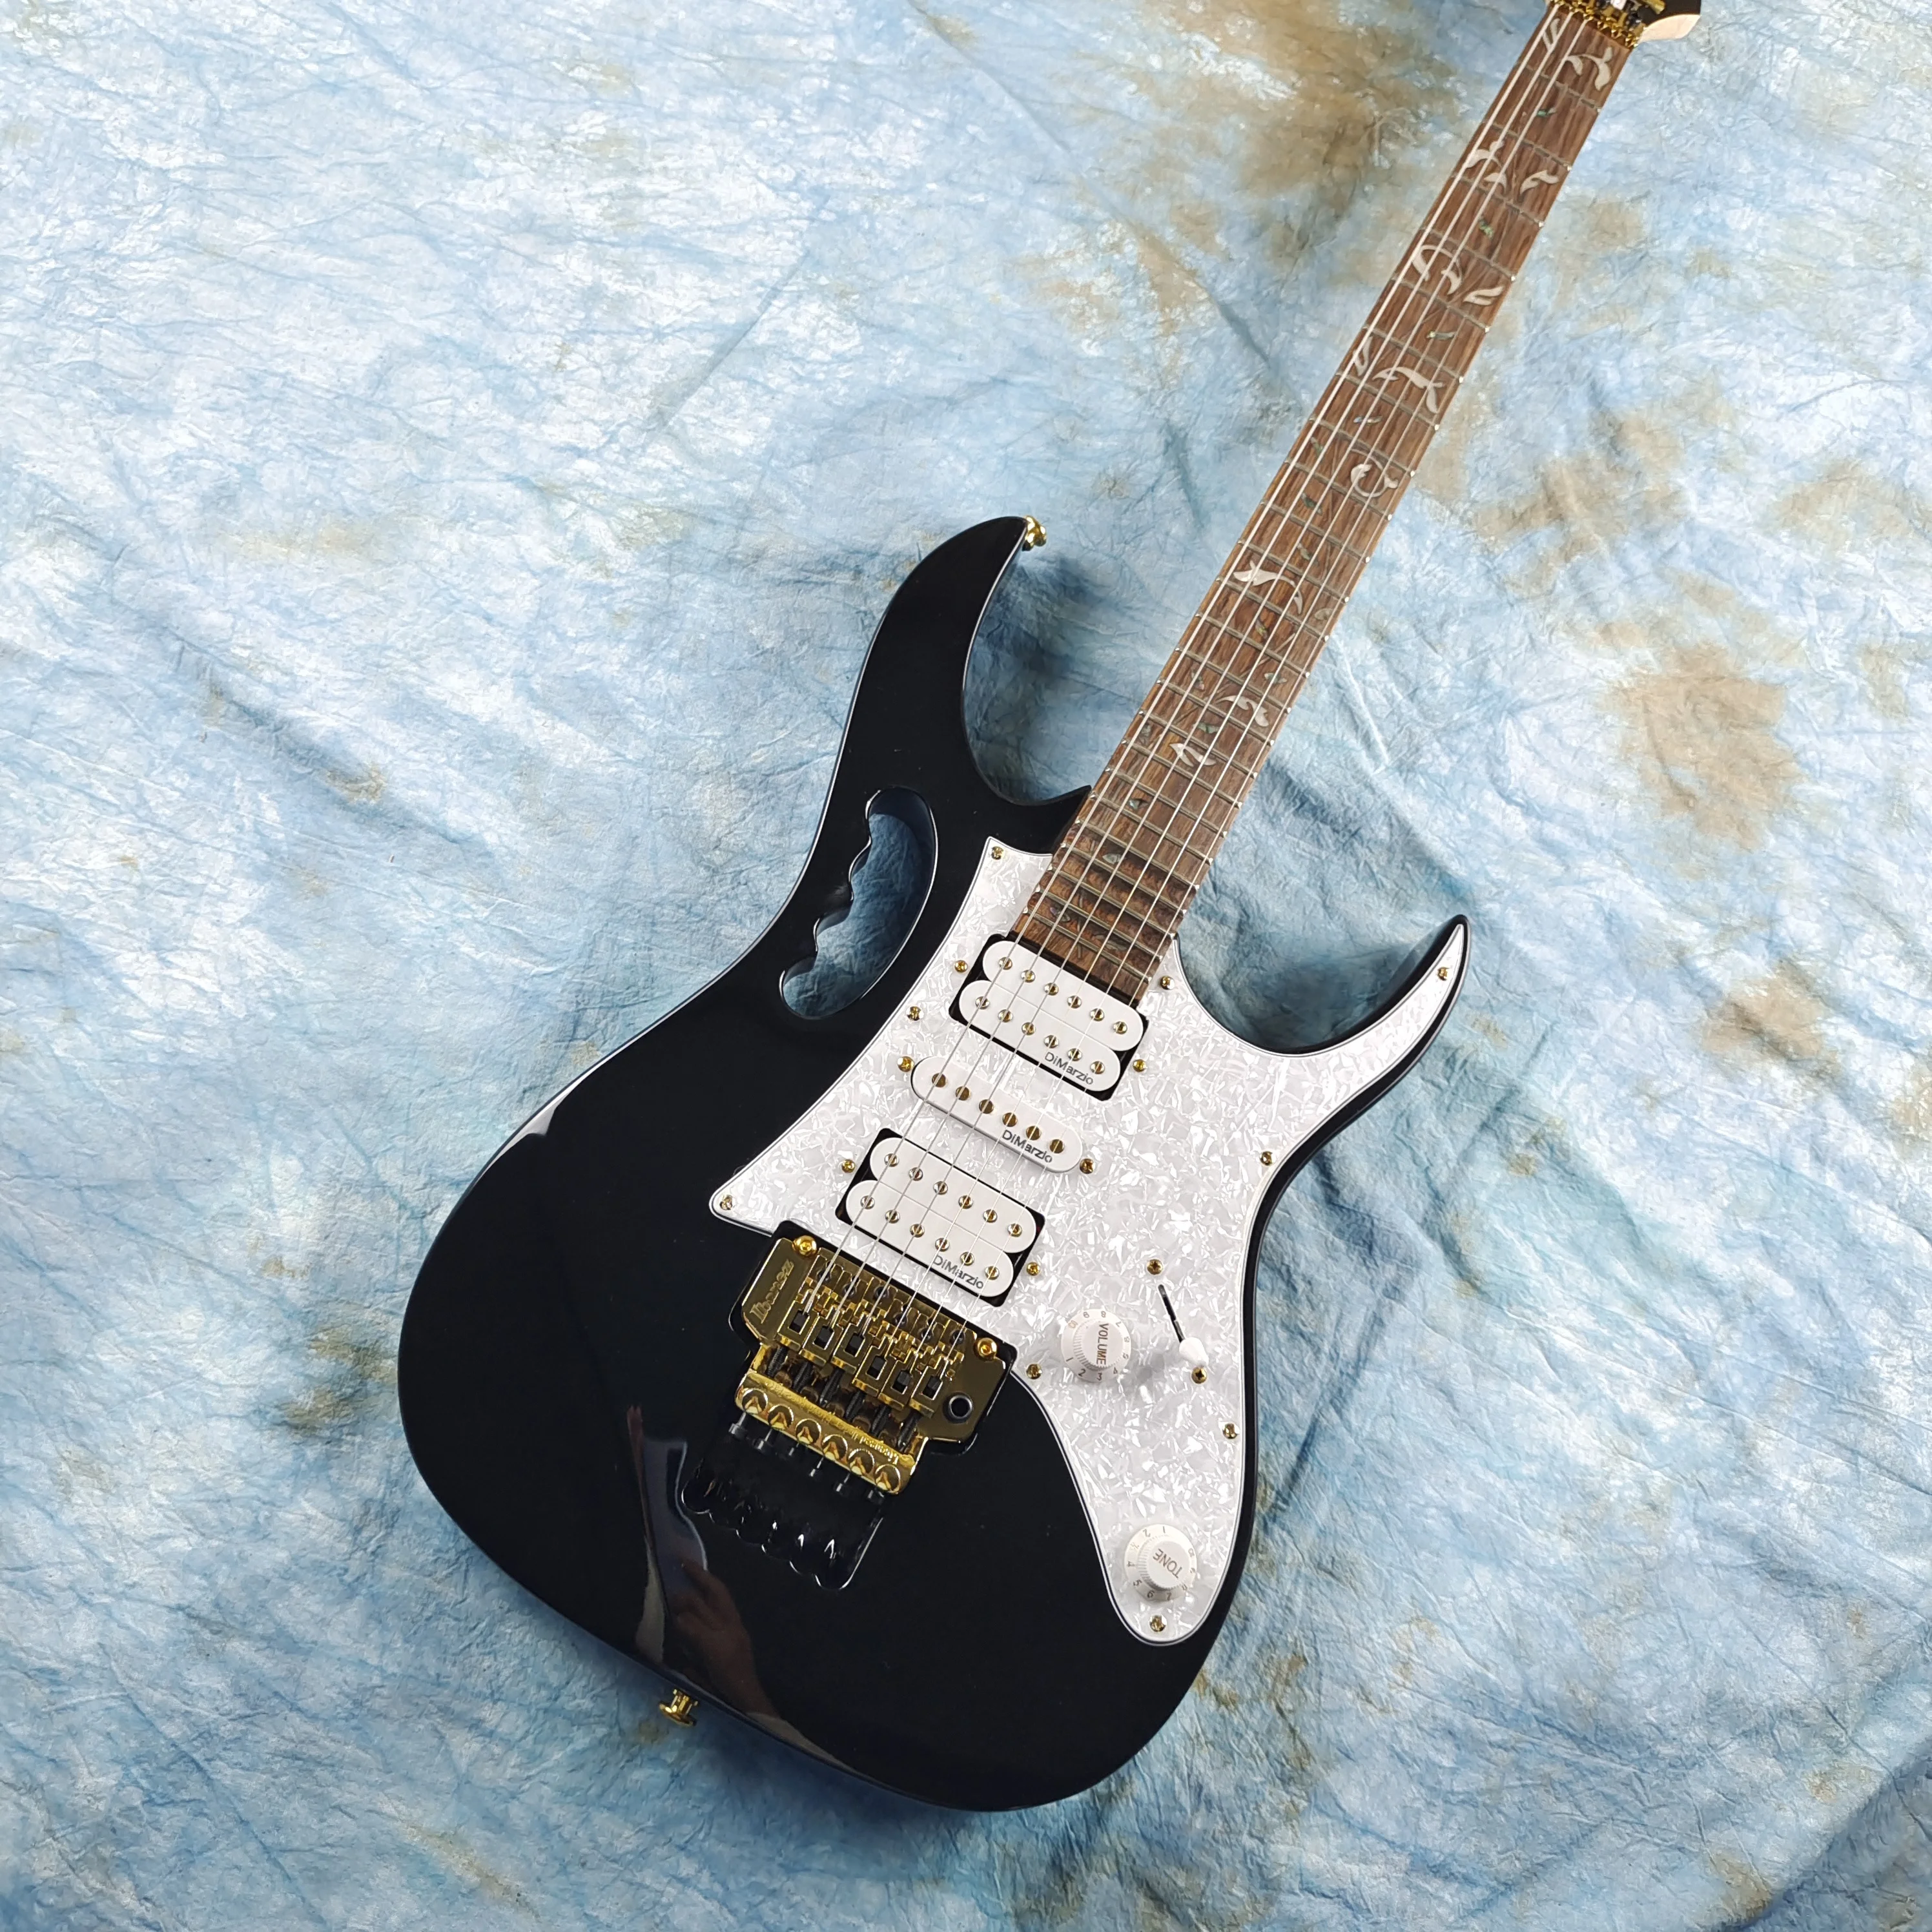 

Irregular electric guitar, black, white pearl guard, gold accessories, dual shake tremolo, in stock, including shipping